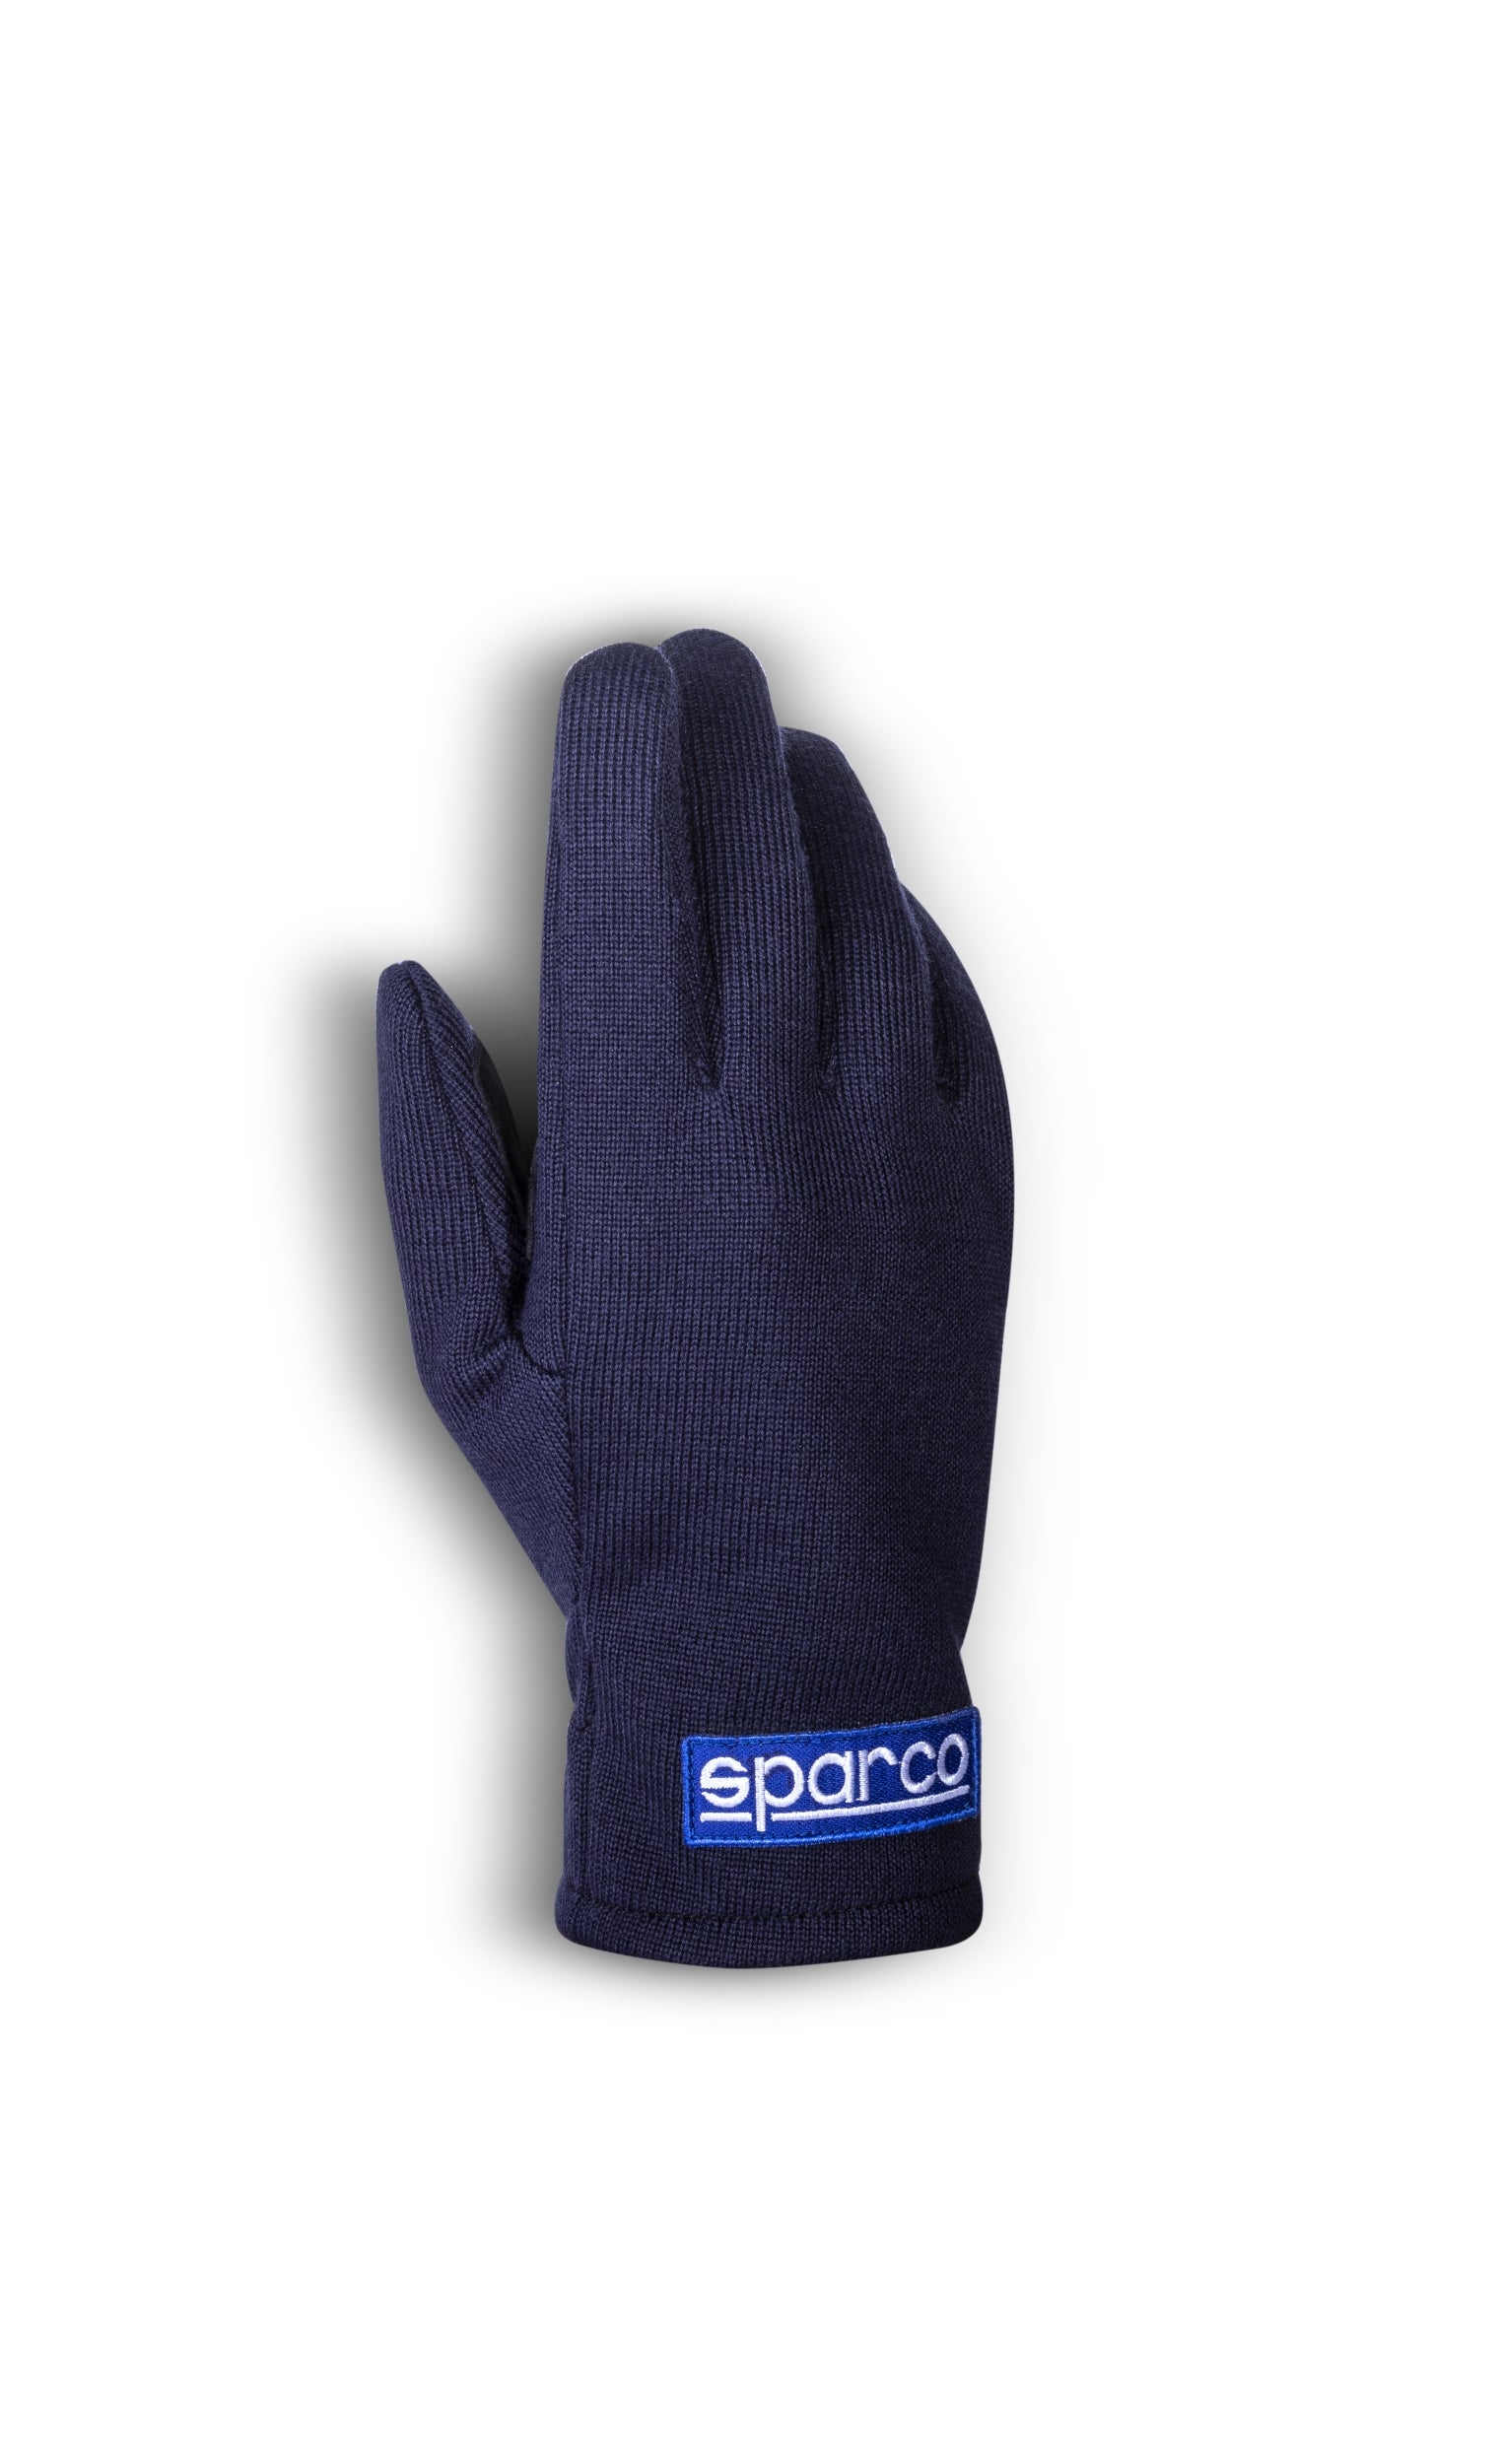 SPARCO 00208212BM NEW WOOL SPORTDRIVE Gloves, navy blue, size 12 Photo-0 